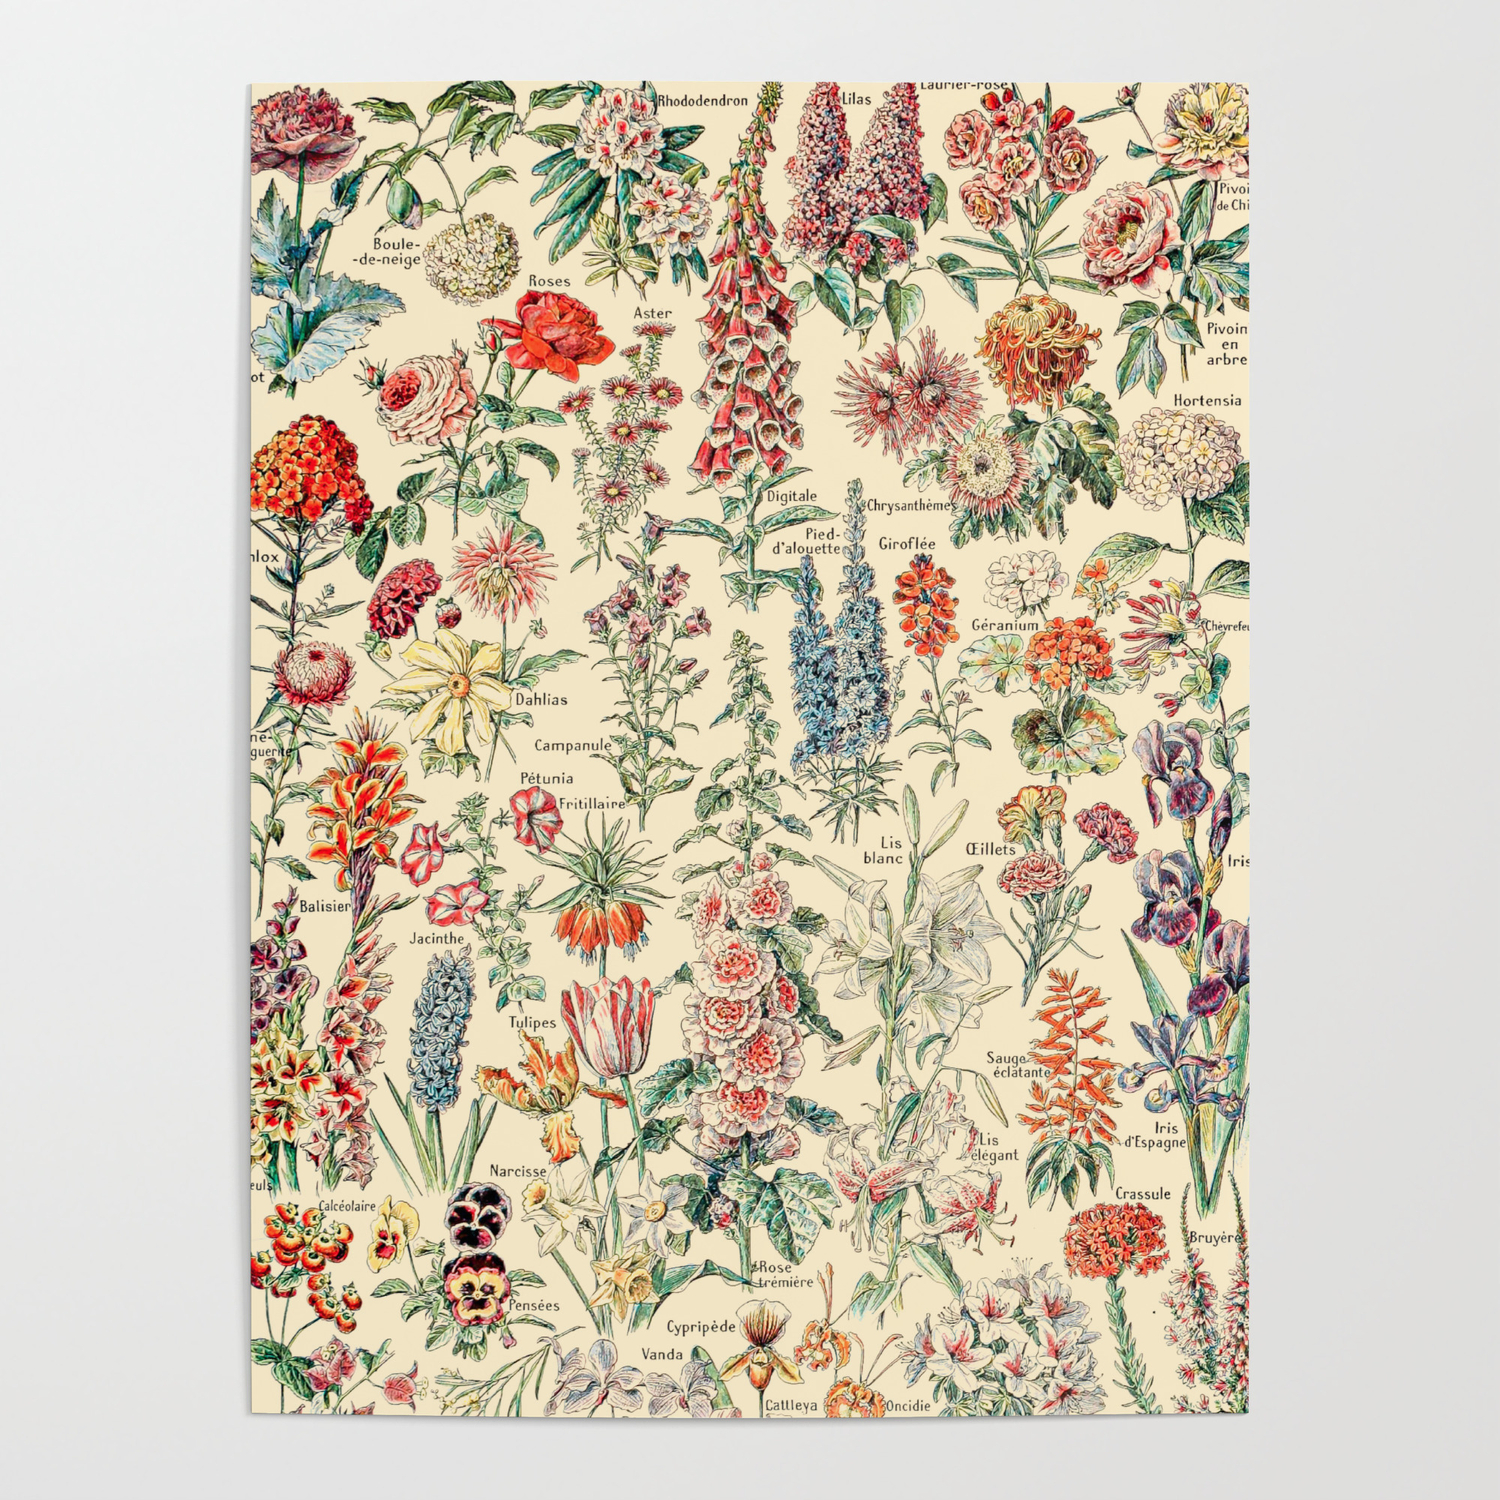 Naar behoren kreupel spel Vintage Floral Drawings // Fleurs by Adolphe Millot XL 19th Century Science  Textbook Artwork Poster by Public Artography | Society6